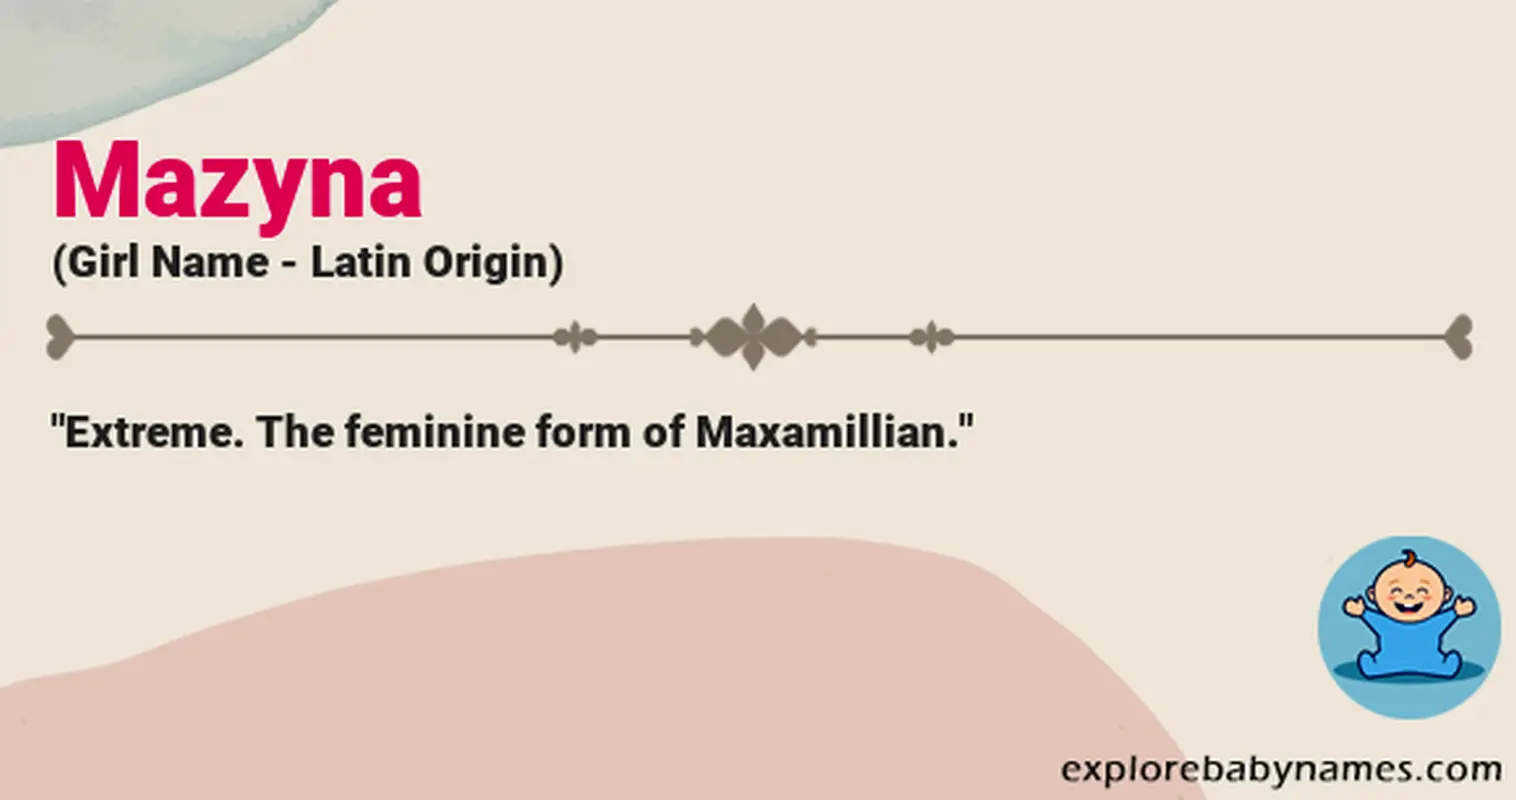 Meaning of Mazyna